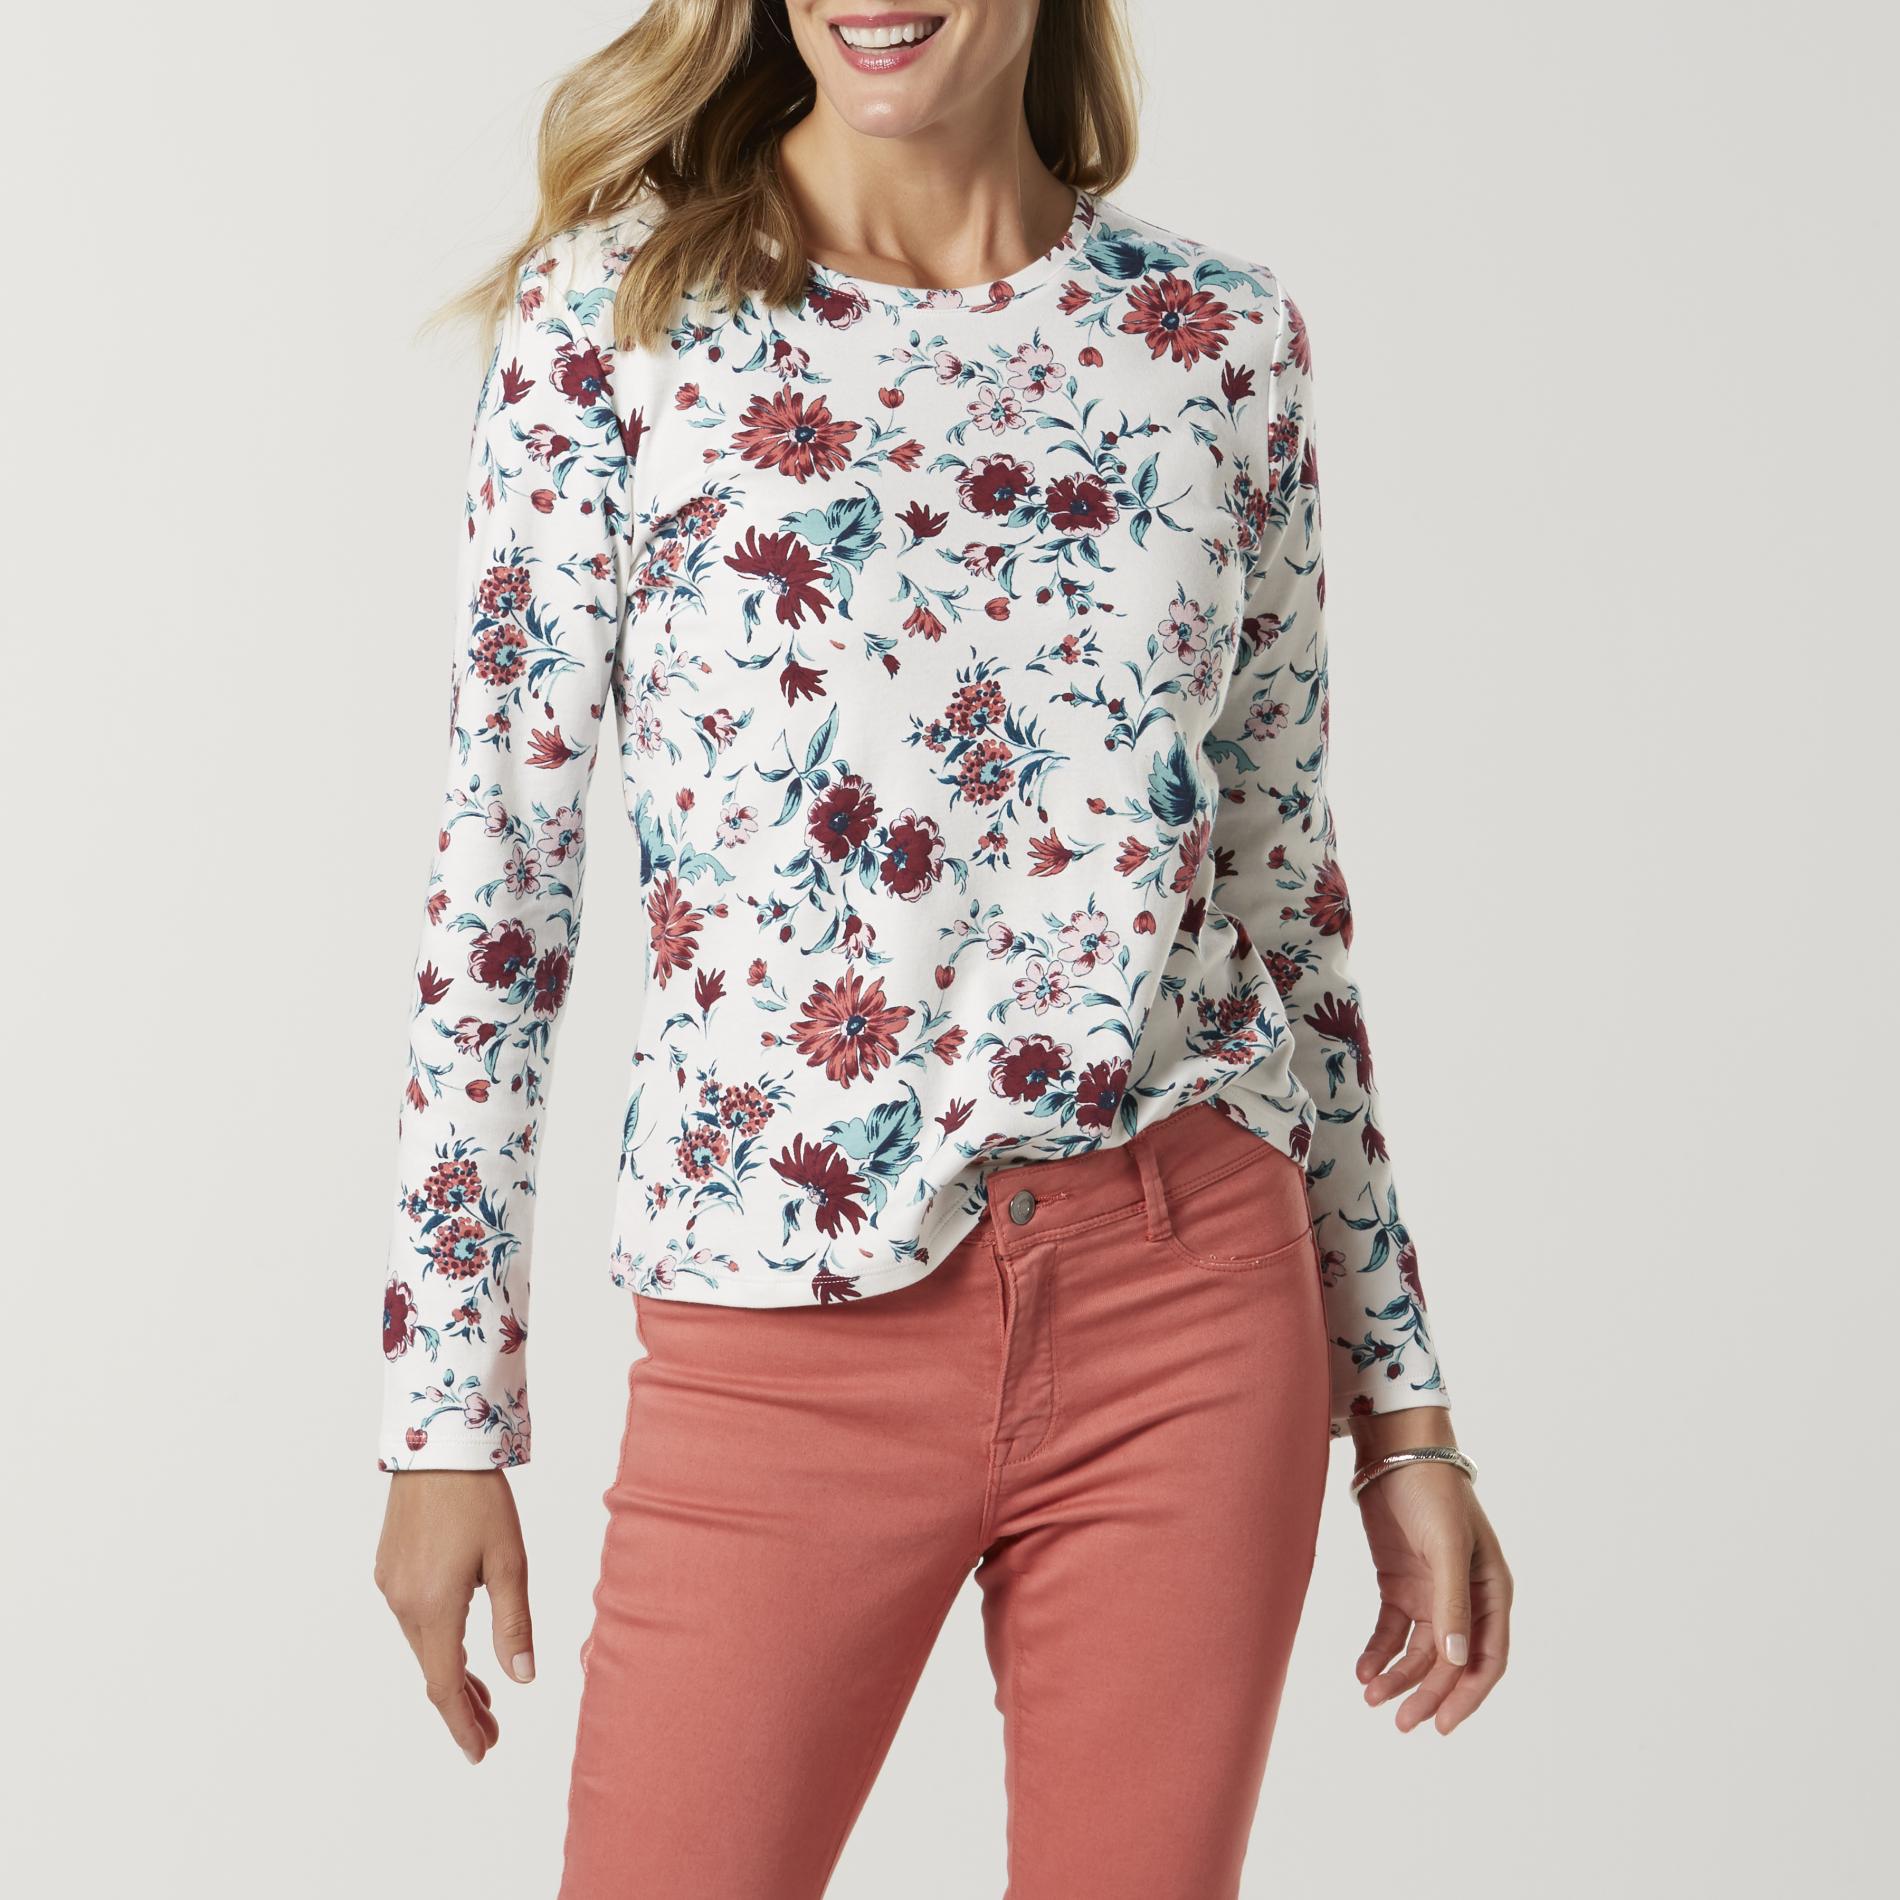 Basic Editions Women's Long-Sleeve T-Shirt - Floral